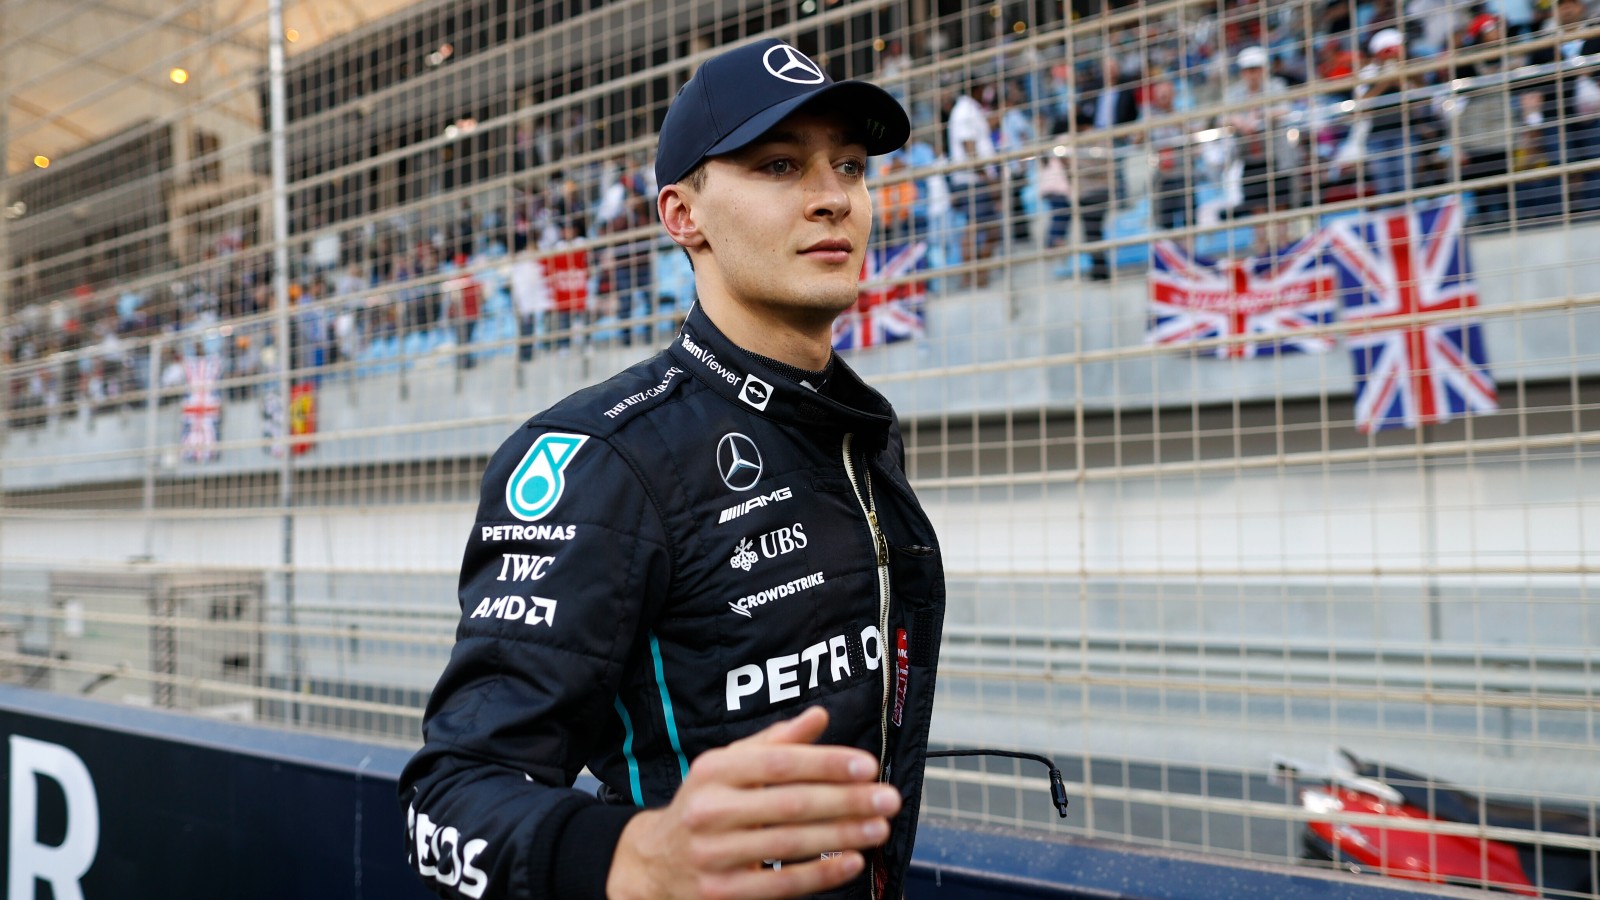 George Russell, Mercedes, on the grid in Bahrain. March 2022.